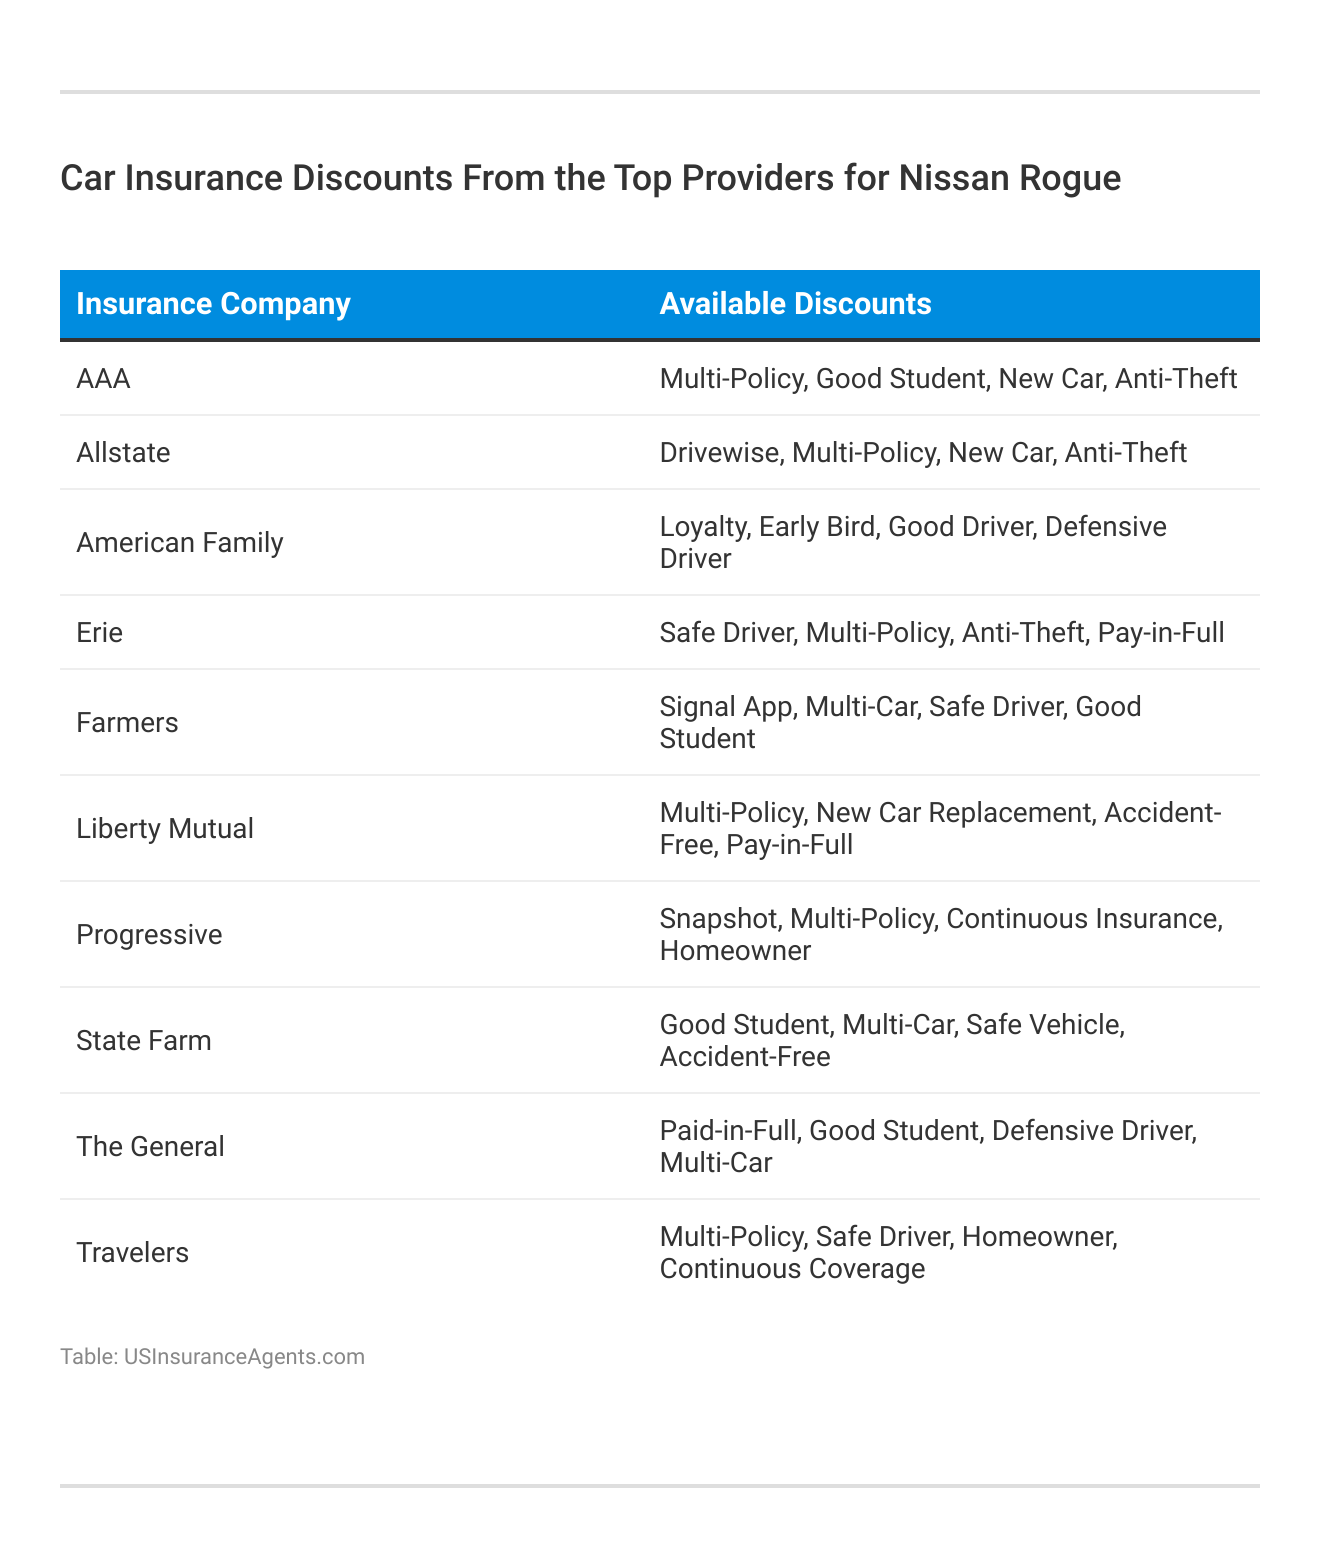 <h3>Car Insurance Discounts From the Top Providers for Nissan Rogue</h3>